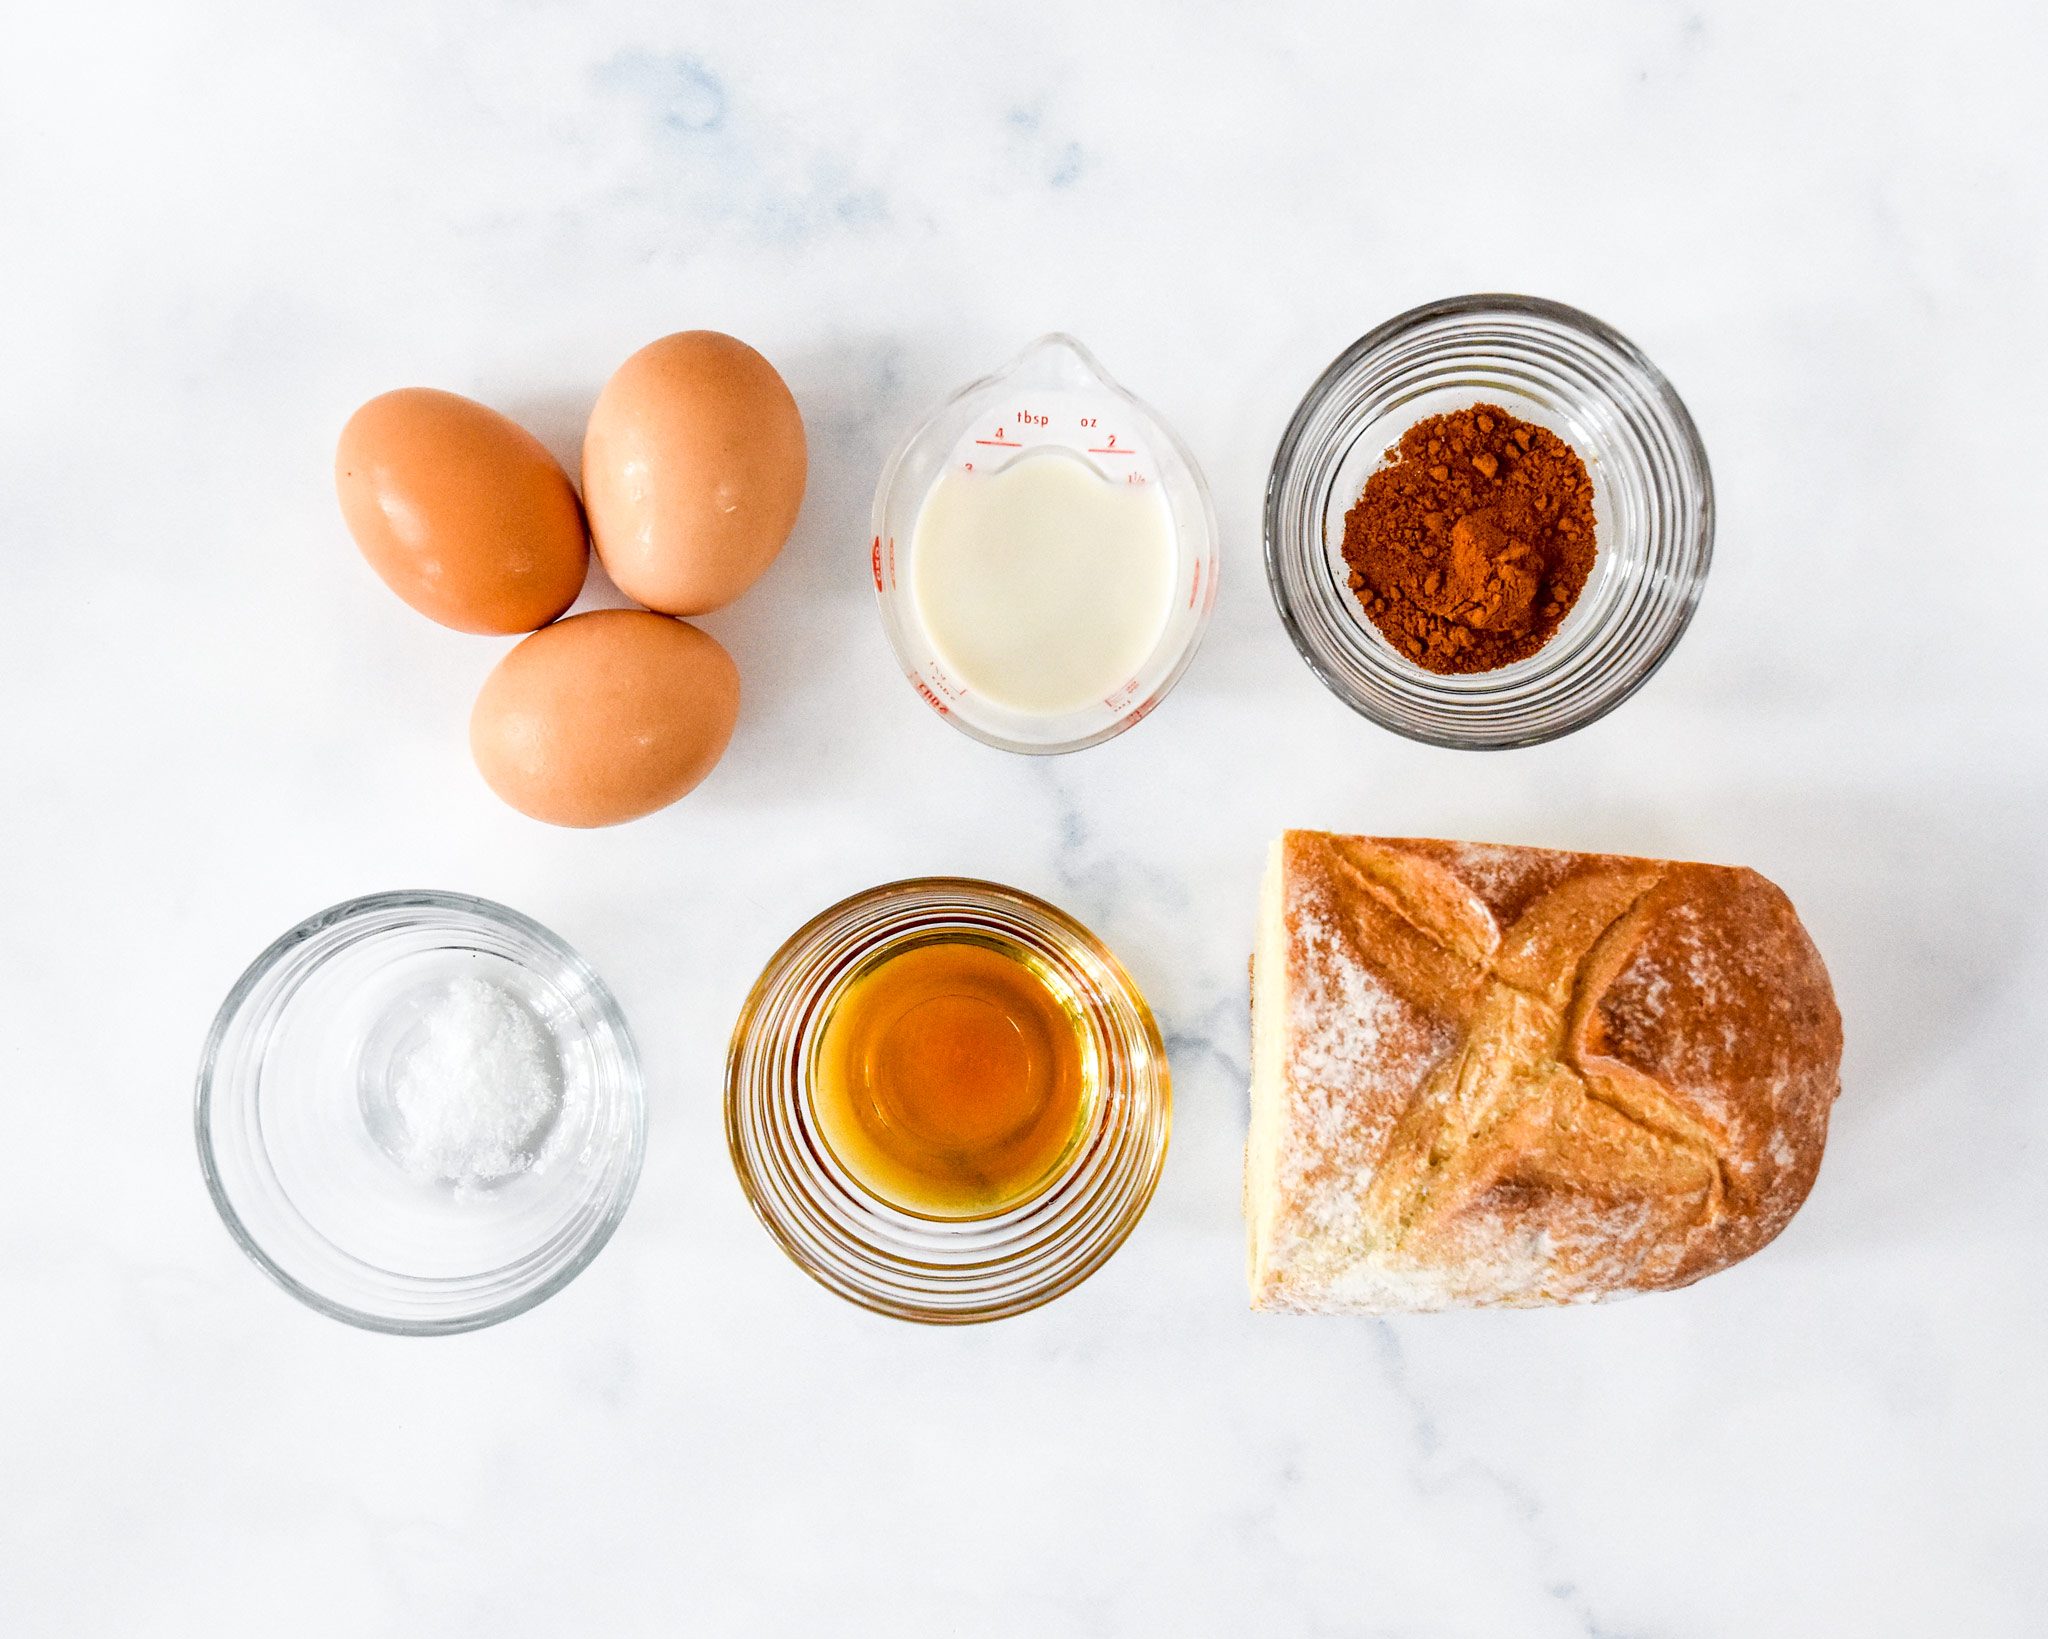 ingredients on a table to make the air fryer french toast bites including bread and eggs.